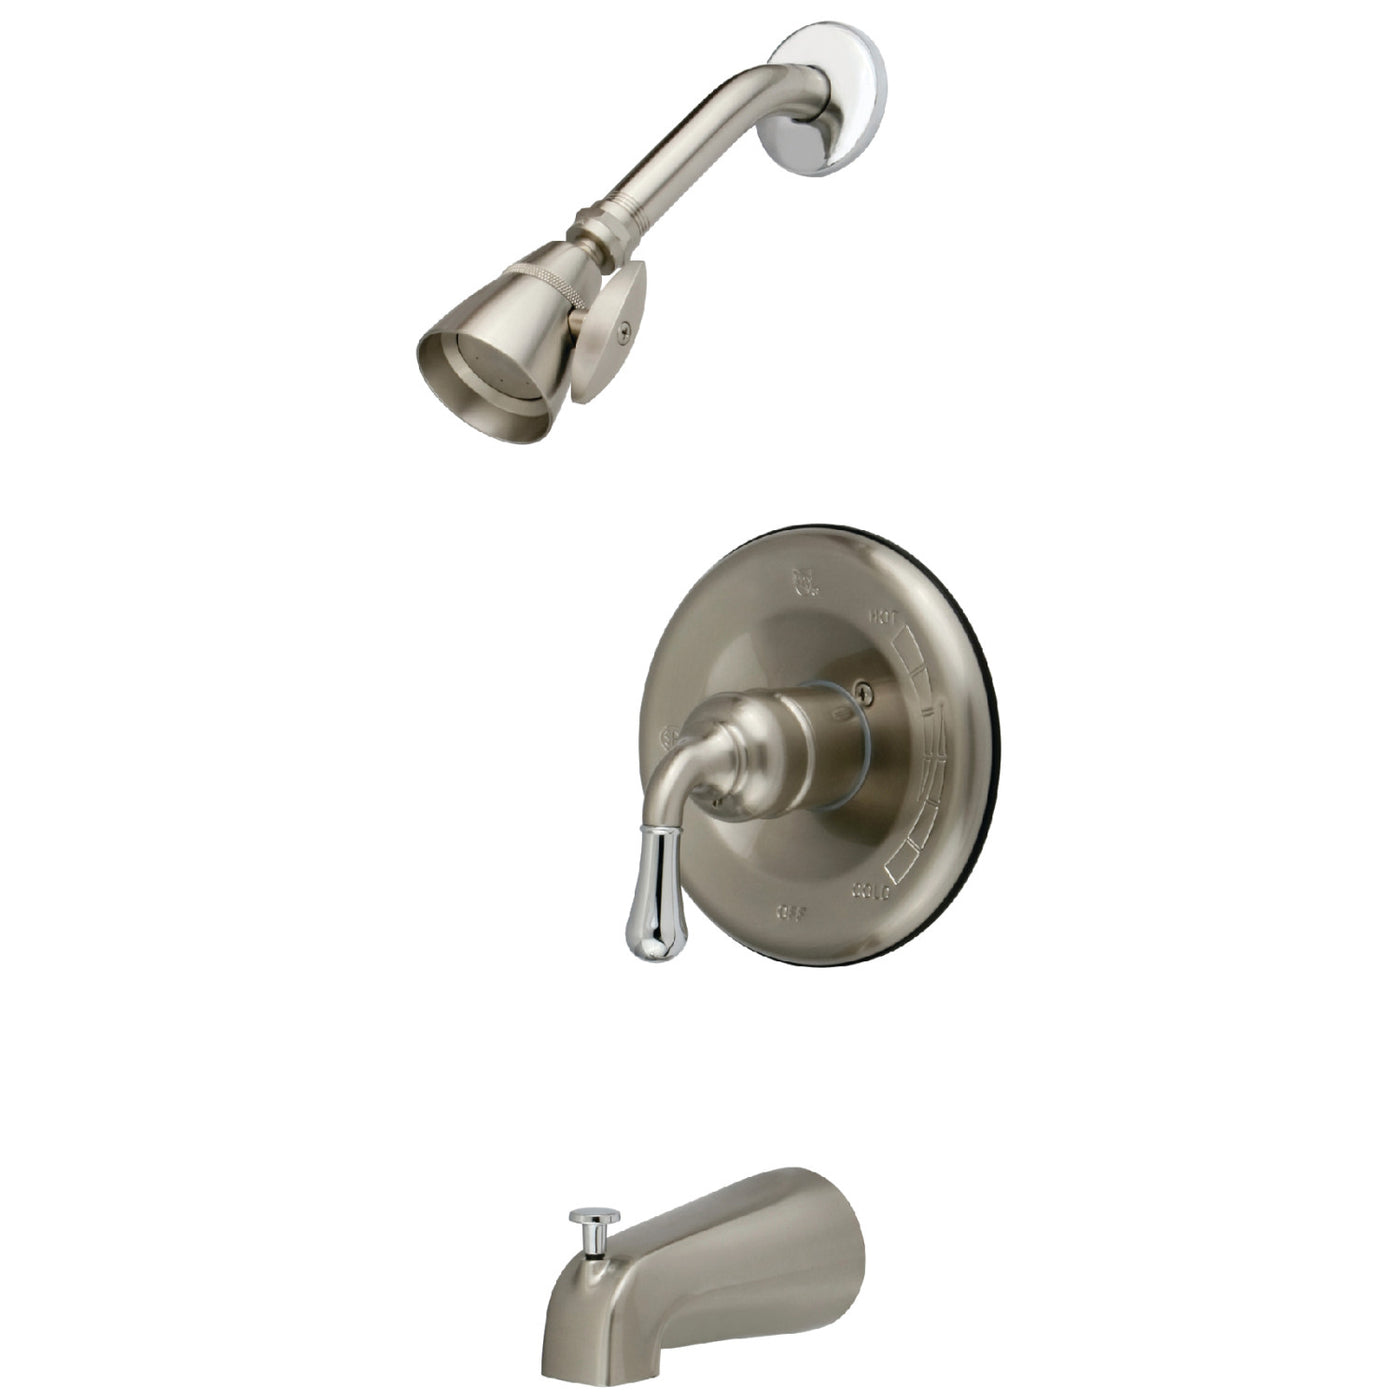 Elements of Design EB1637 Single-Handle Tub and Shower Faucet, Brushed Nickel/Polished Chrome